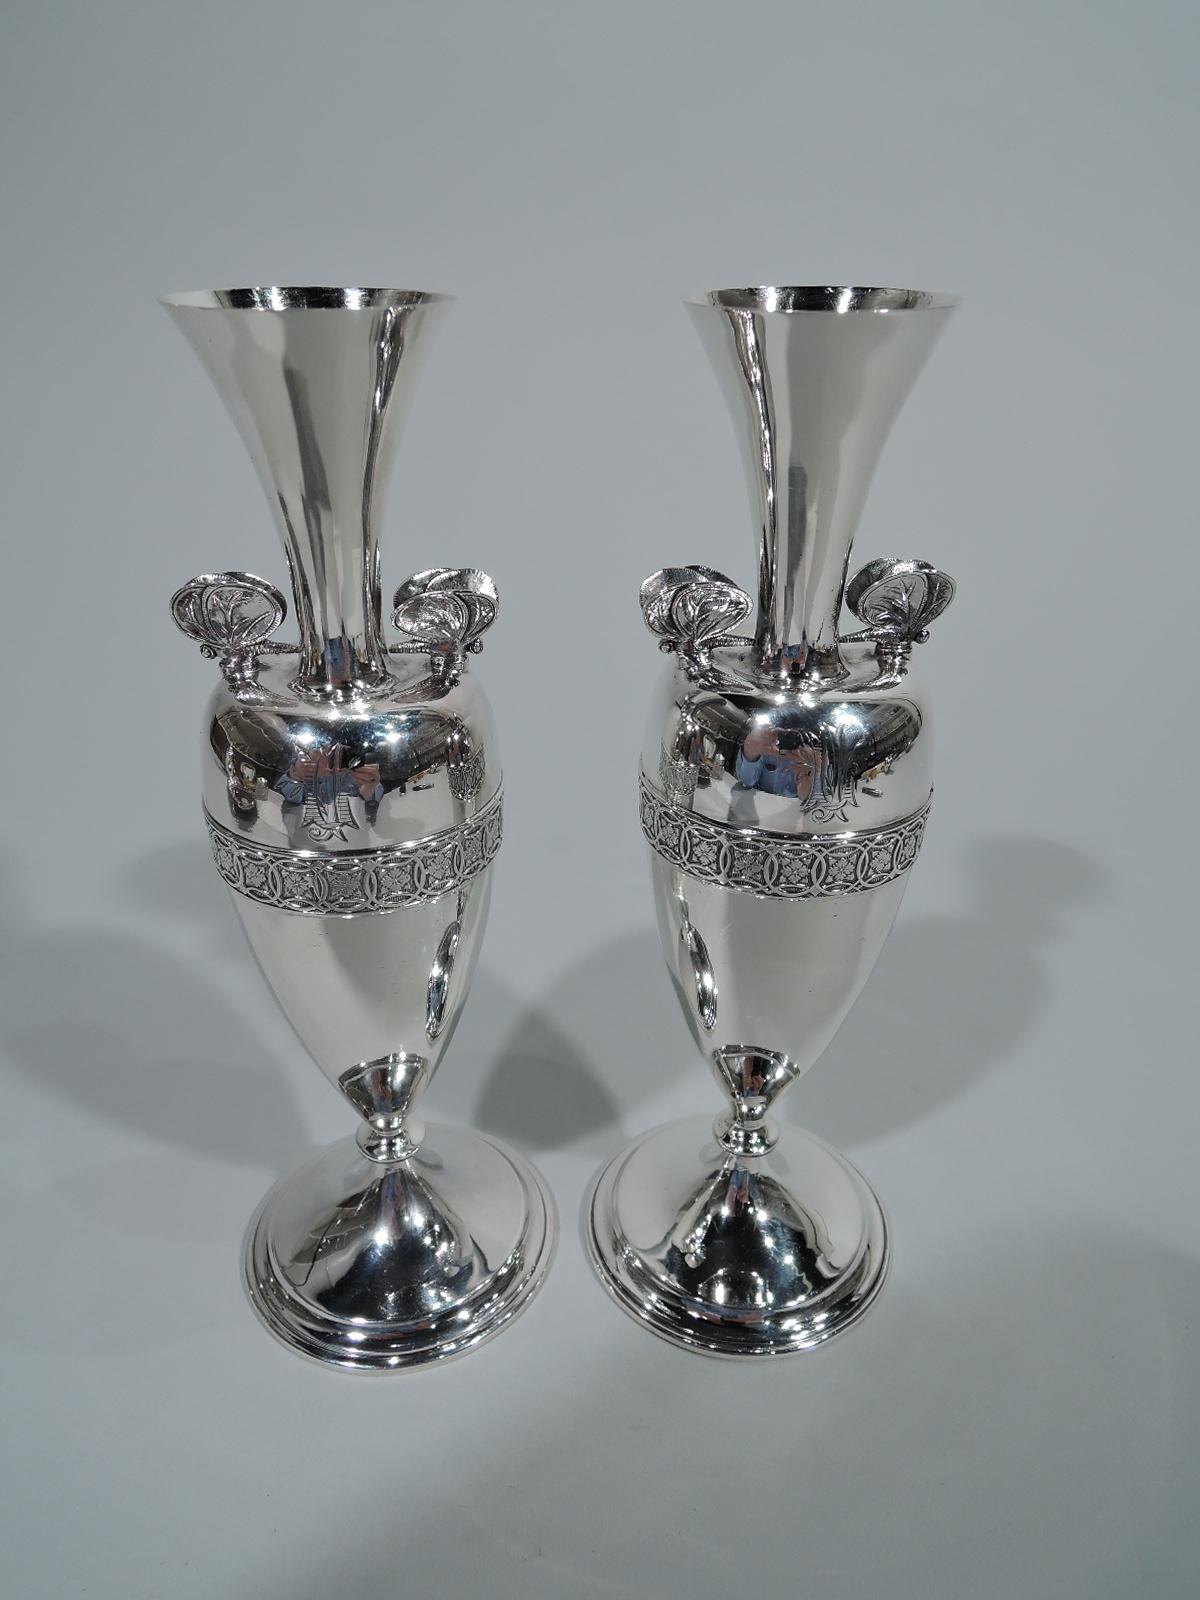 Pair of early sterling silver Greek Revival vases. Retailed by Tiffany & Co. in New York. Each: Amphora with ovoid body, spread and stepped domed foot, and trumpet neck and mouth. Tooled band with rosettes in interlaced circles on vertical lines.